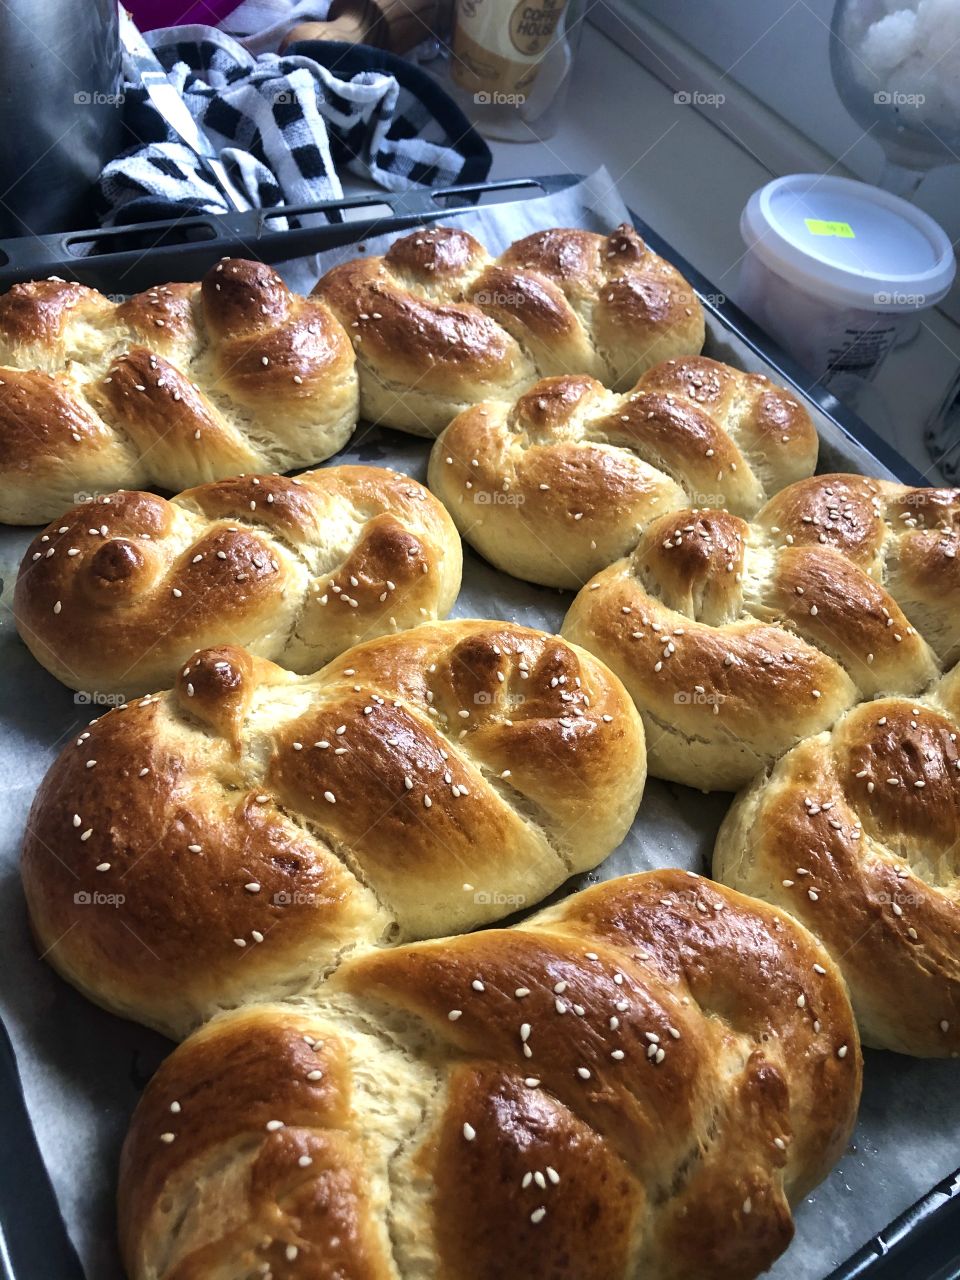 Hallah bread is ready and looking delicious 😋